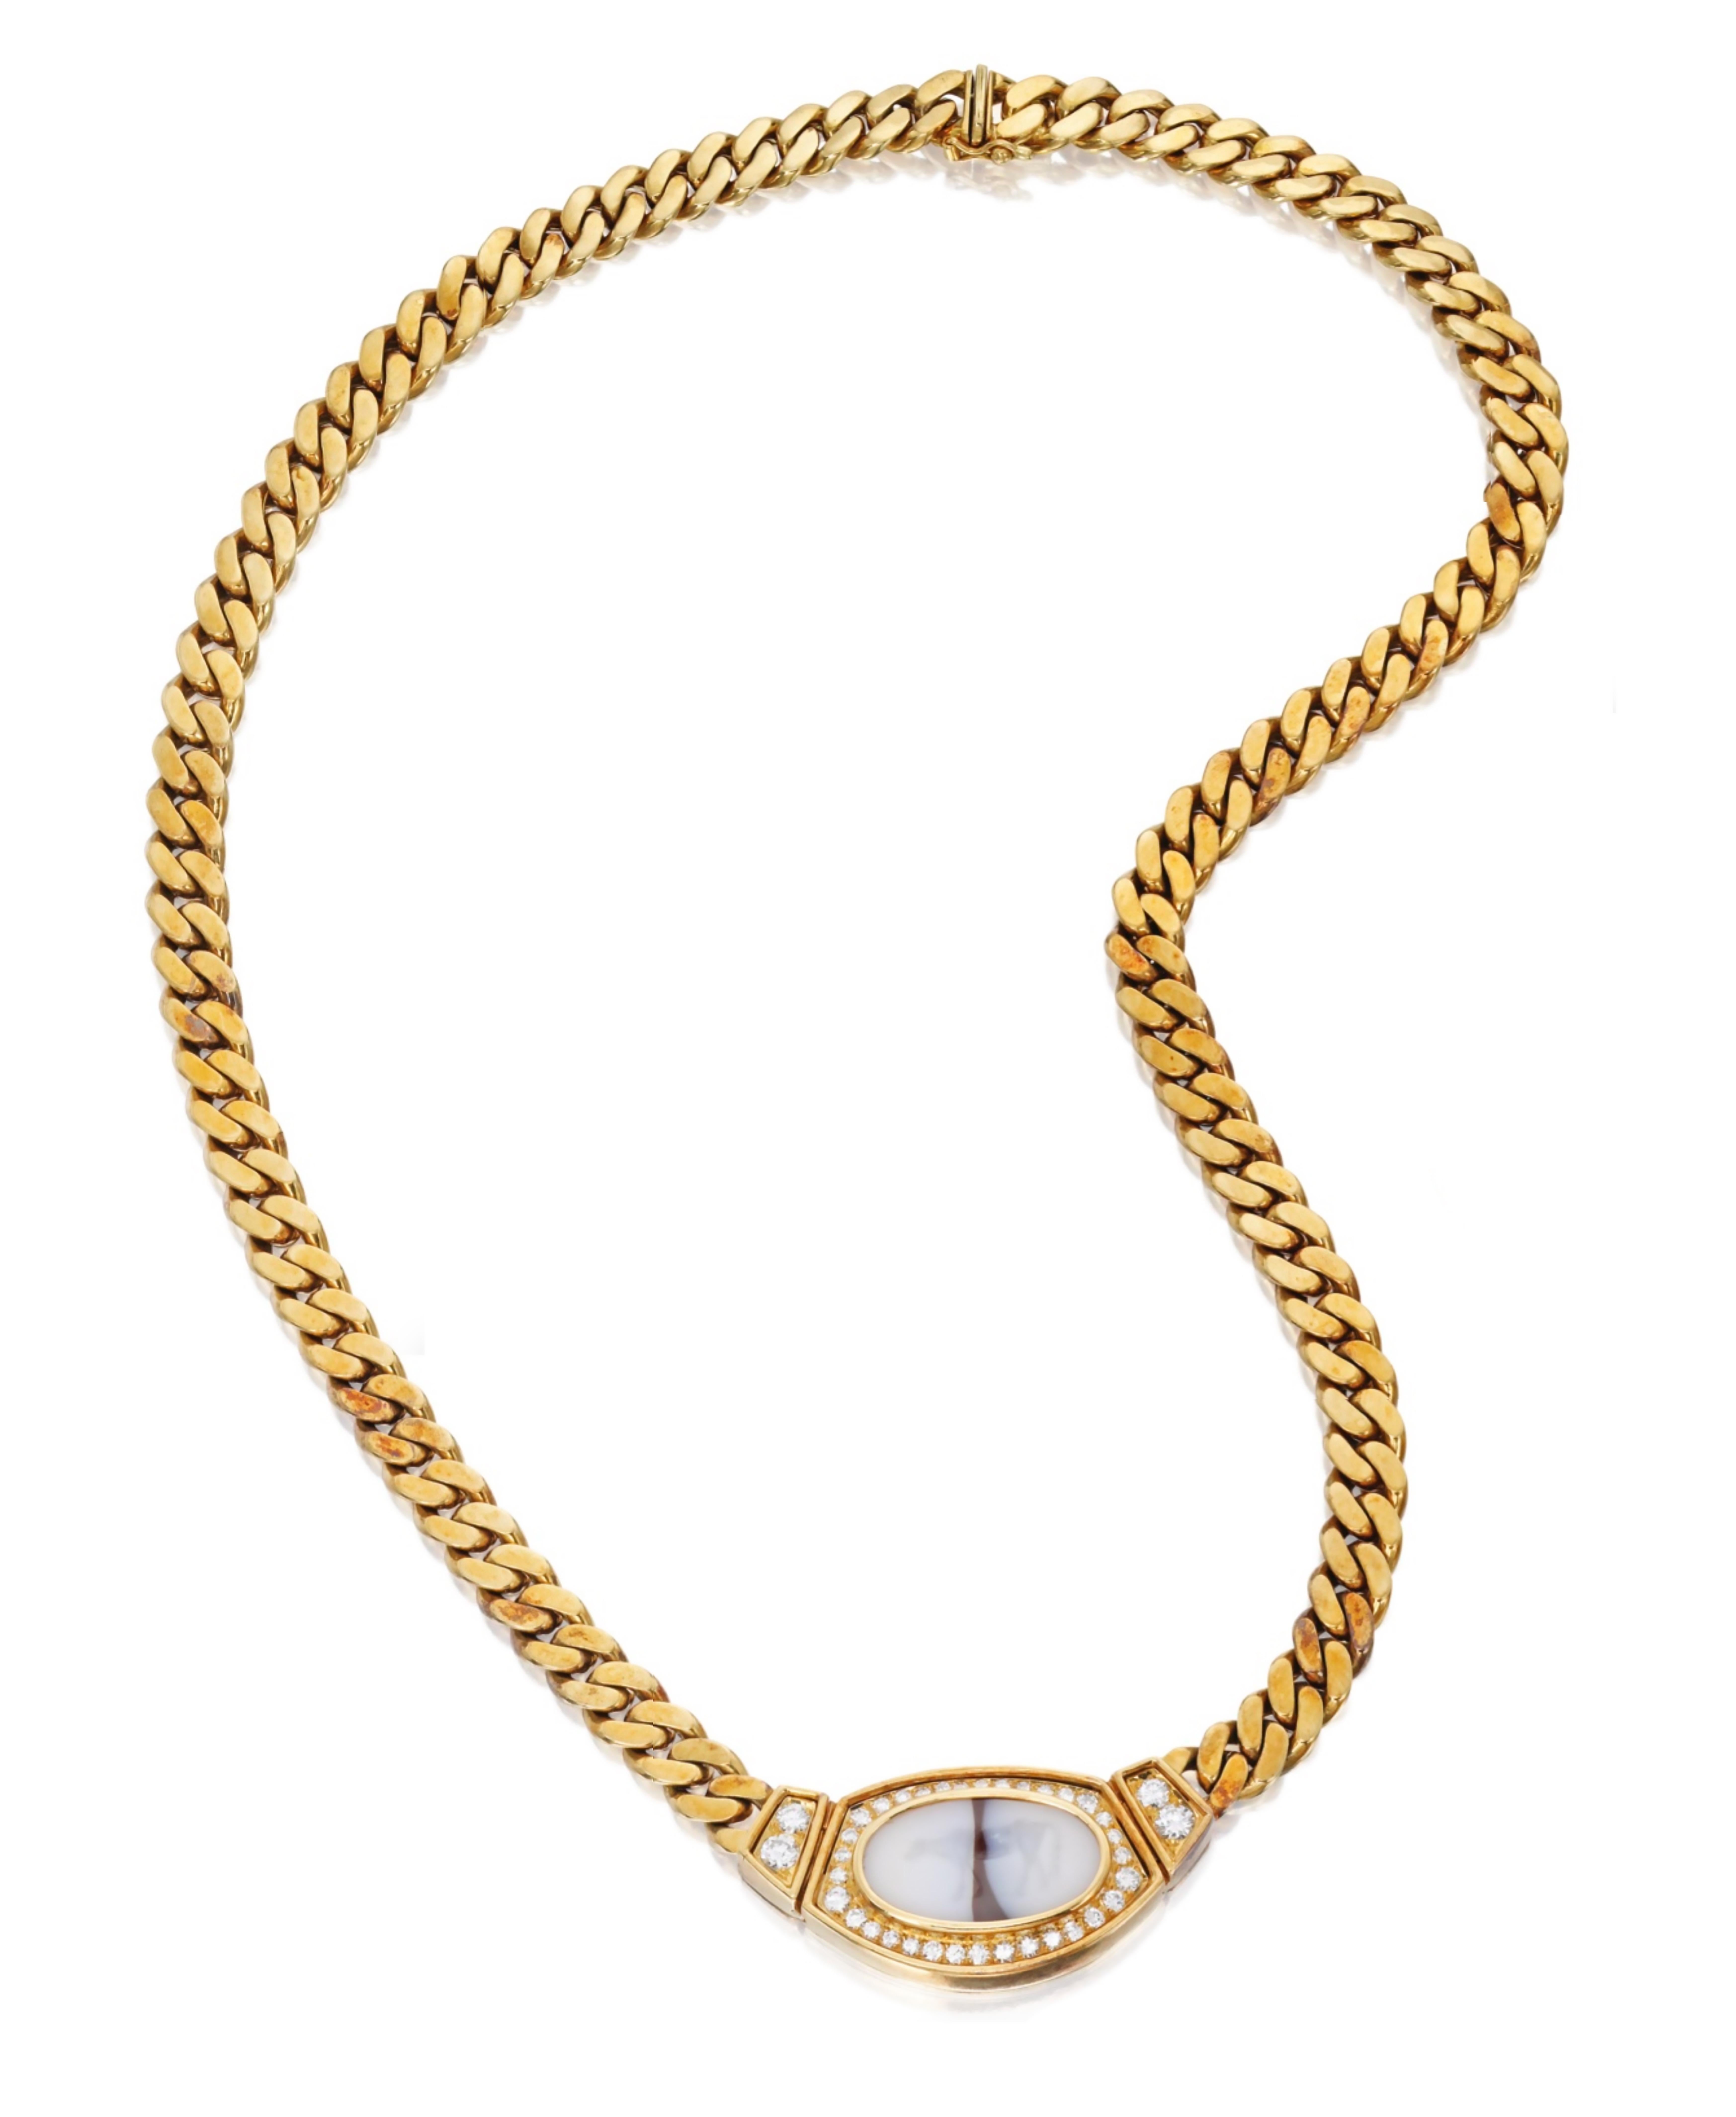 A chic Bulgari curb link chain necklace suspending an ancient intaglio depicting a cow, surrounded by round brilliant cut diamonds. Made in Italy, circa 1970, 18; karat yellow gold.